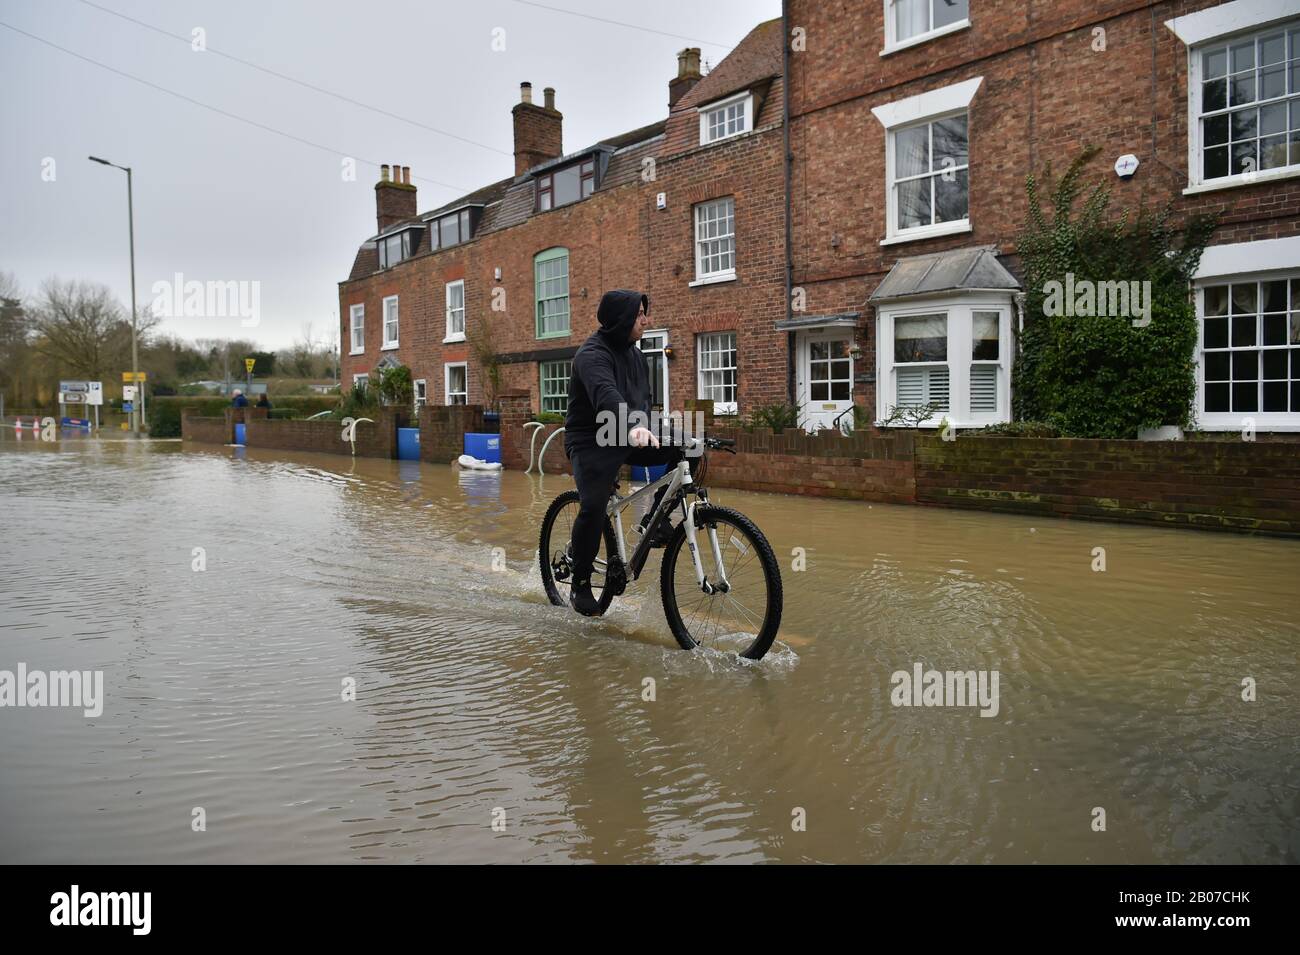 A man rides a bike through flood water, as pumps and flood barriers help to keep the water from flooding homes in Gloucester Road in Tewkesbury, Gloucestershire, following the aftermath of Storm Dennis. Stock Photo